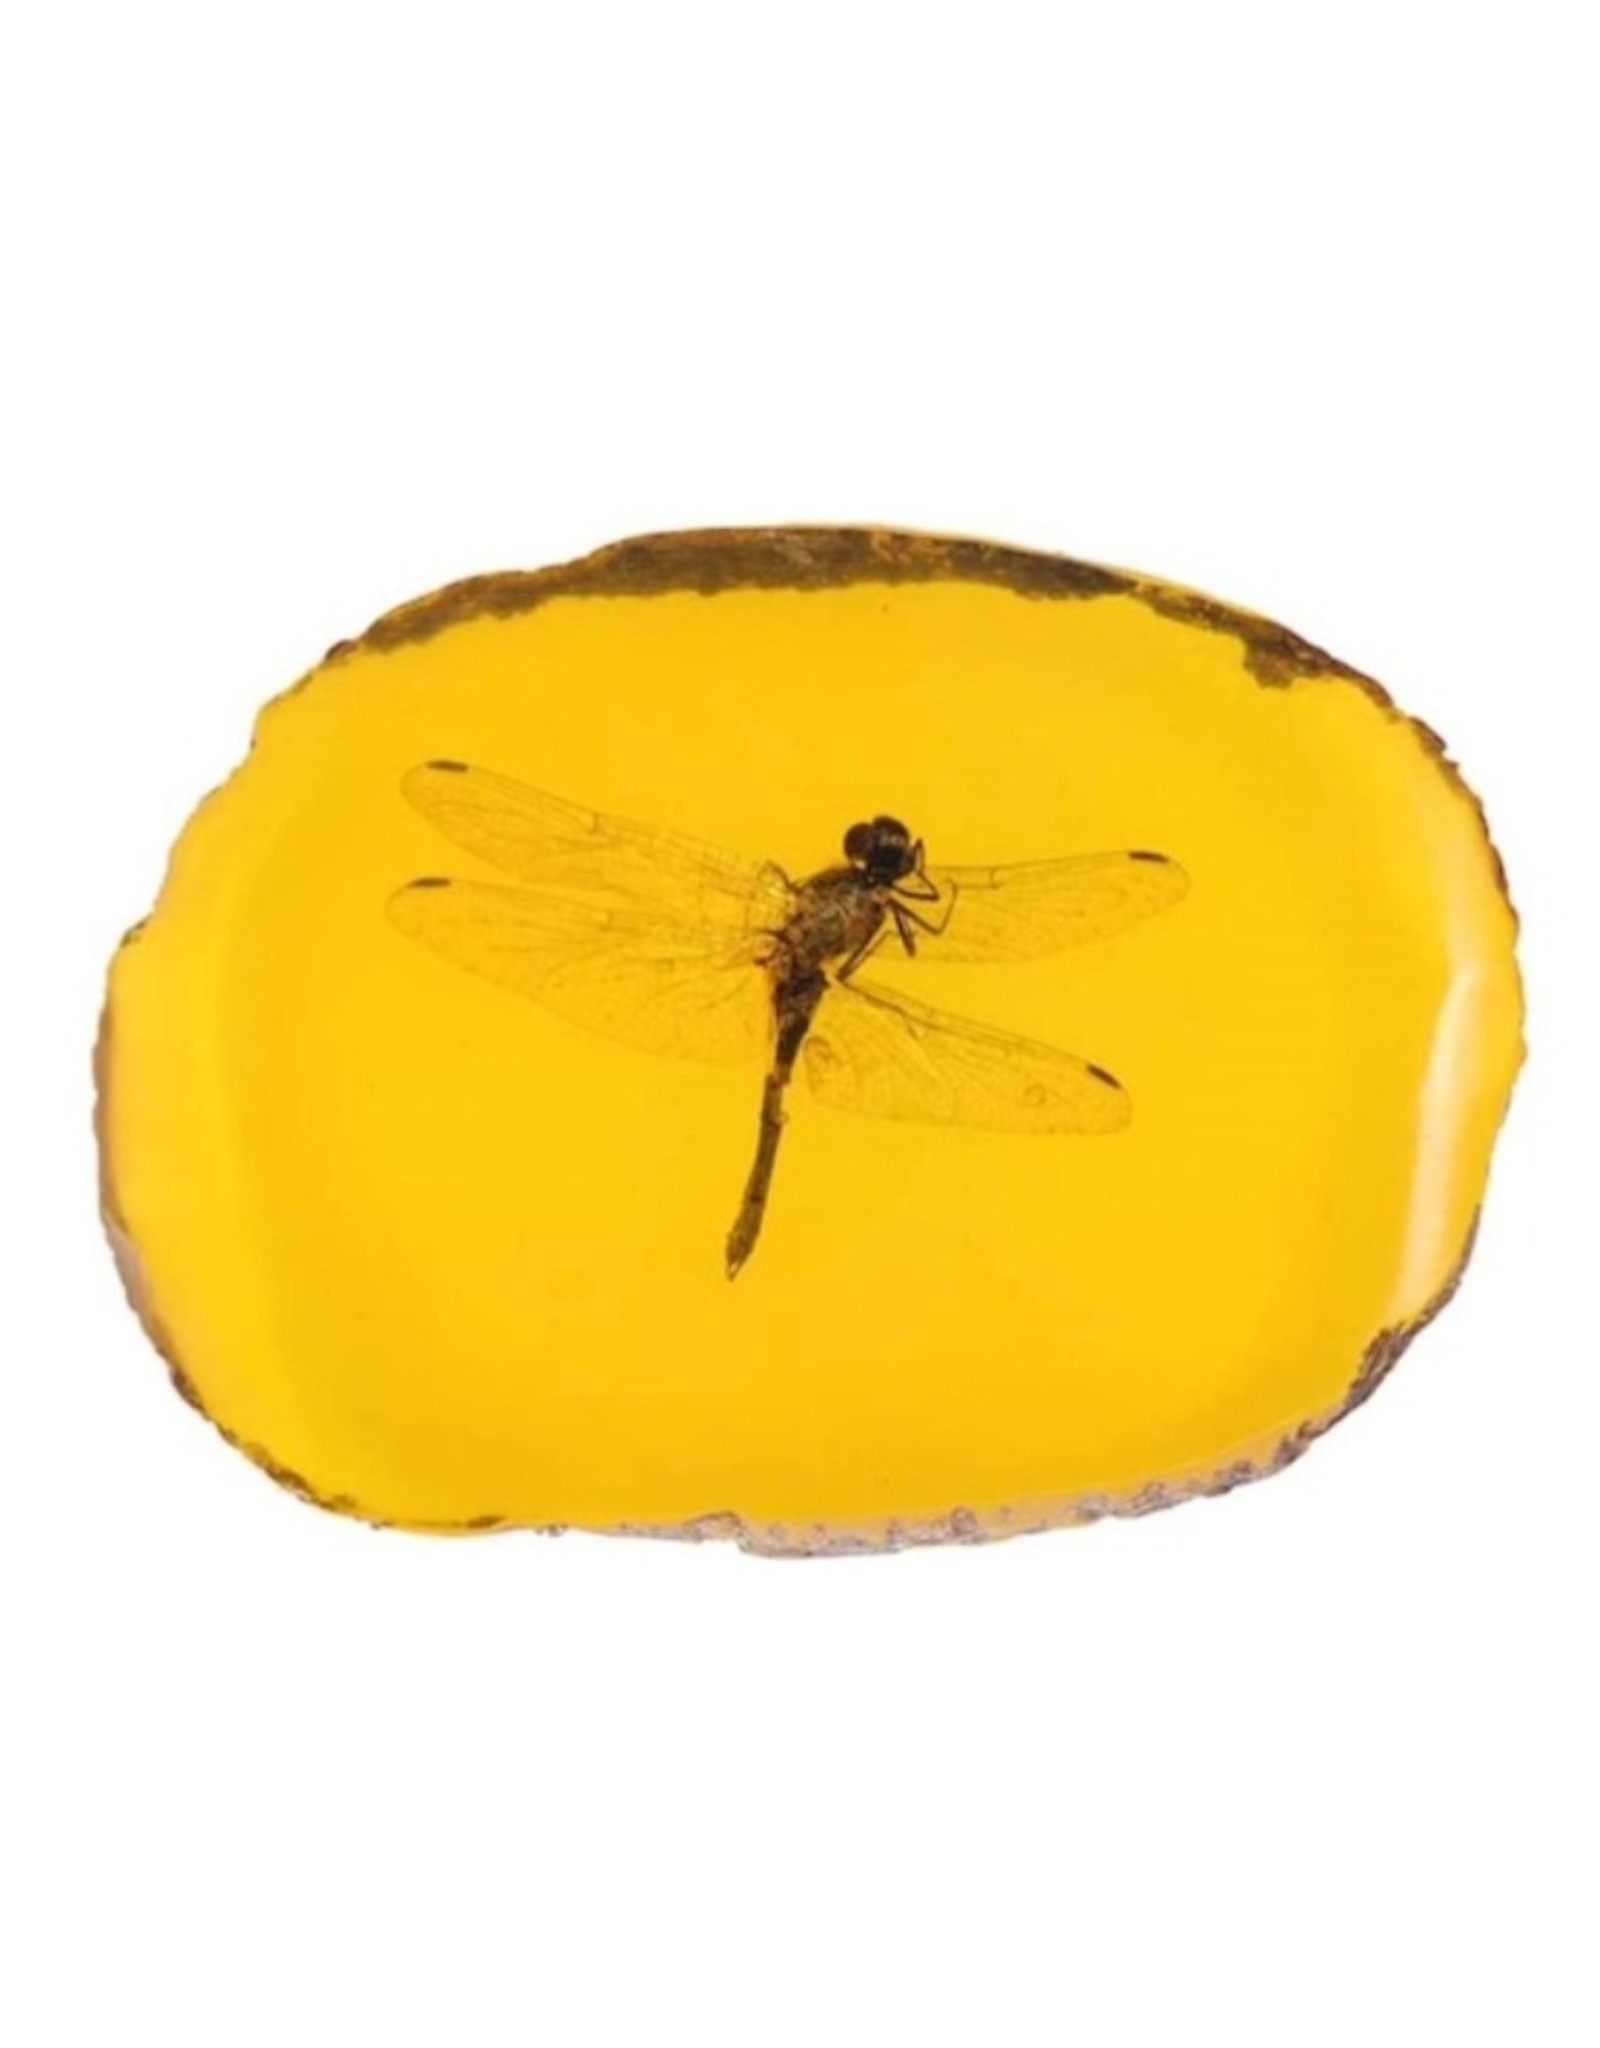 Trukado Miscellaneous - Dragonfly Fossil Cast in Resin 11cm